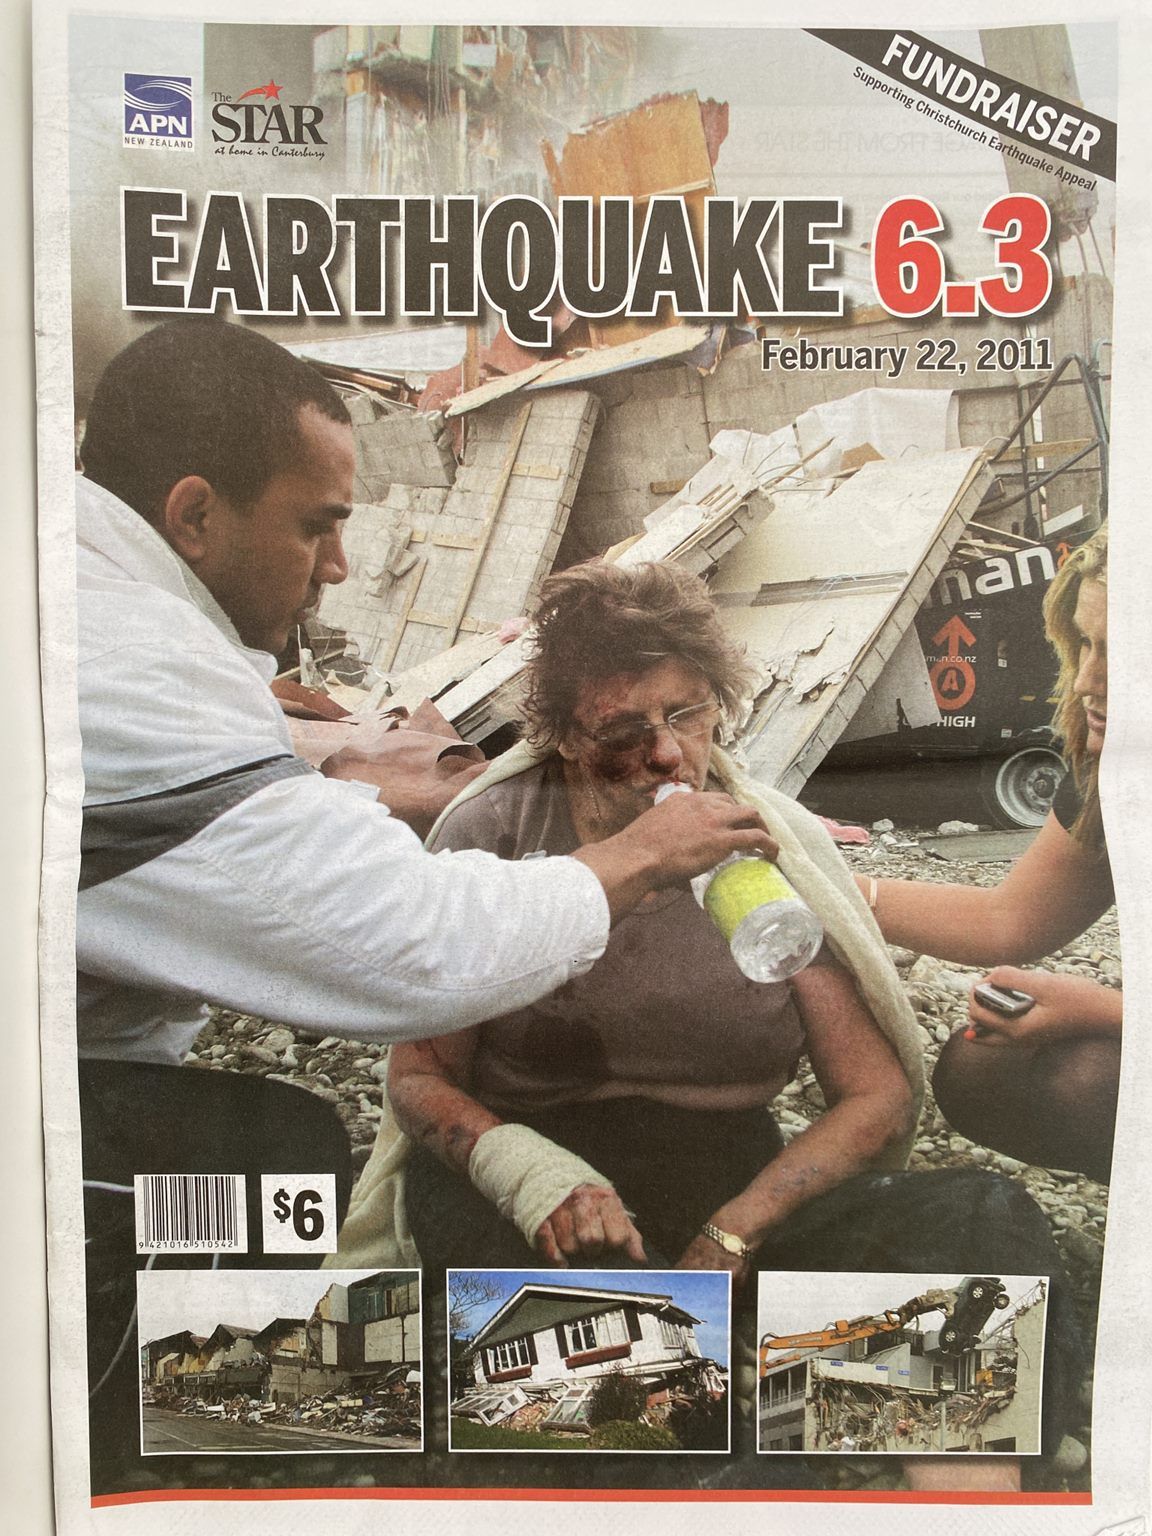 OLD NEWSPAPER: The Star - Christchurch Earthquake Special edition, February 2011